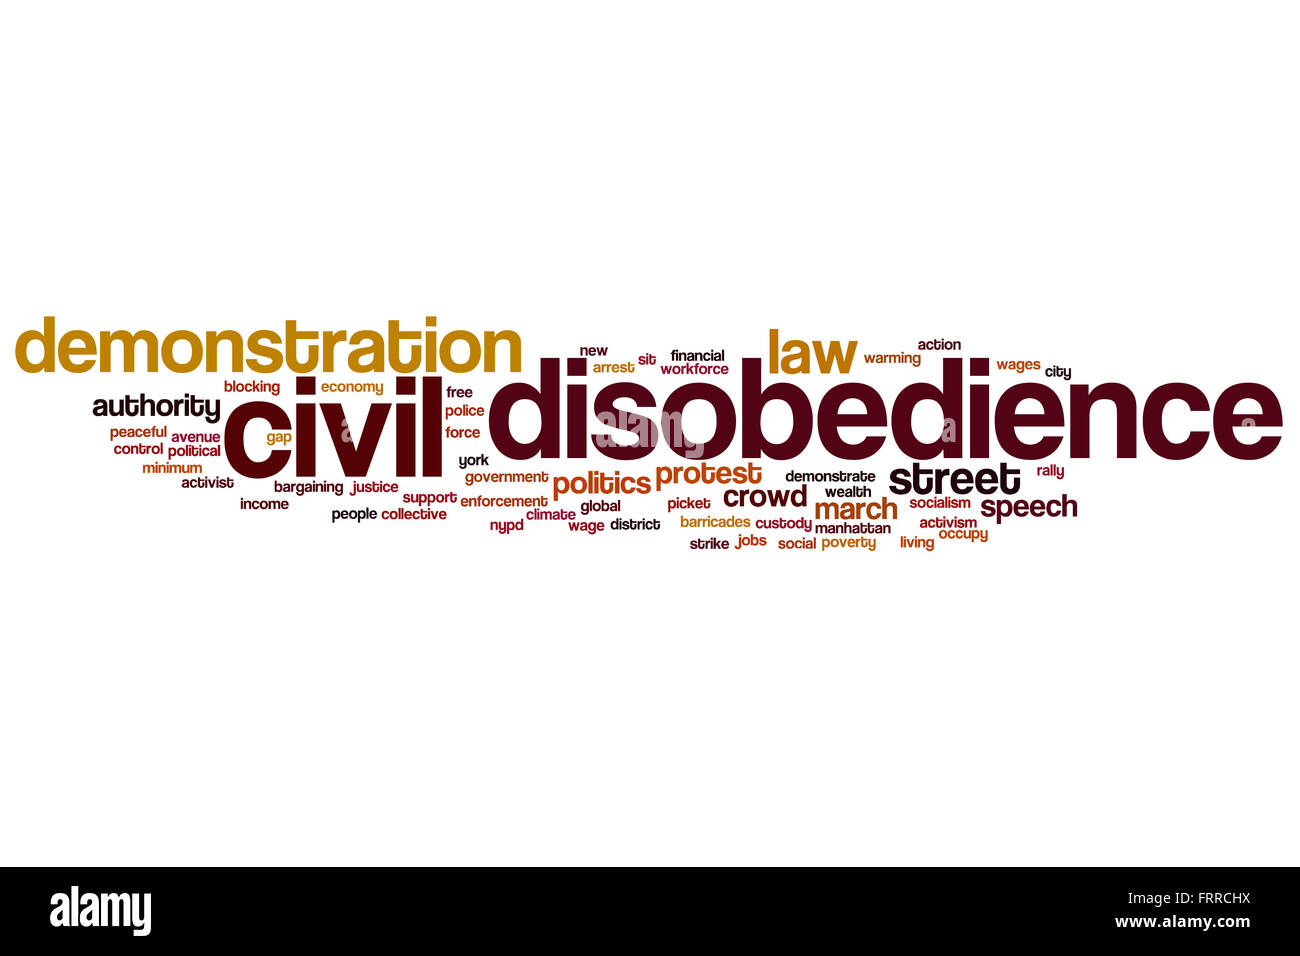 Civil disobedience word cloud concept with demonstration protest related tags Stock Photo